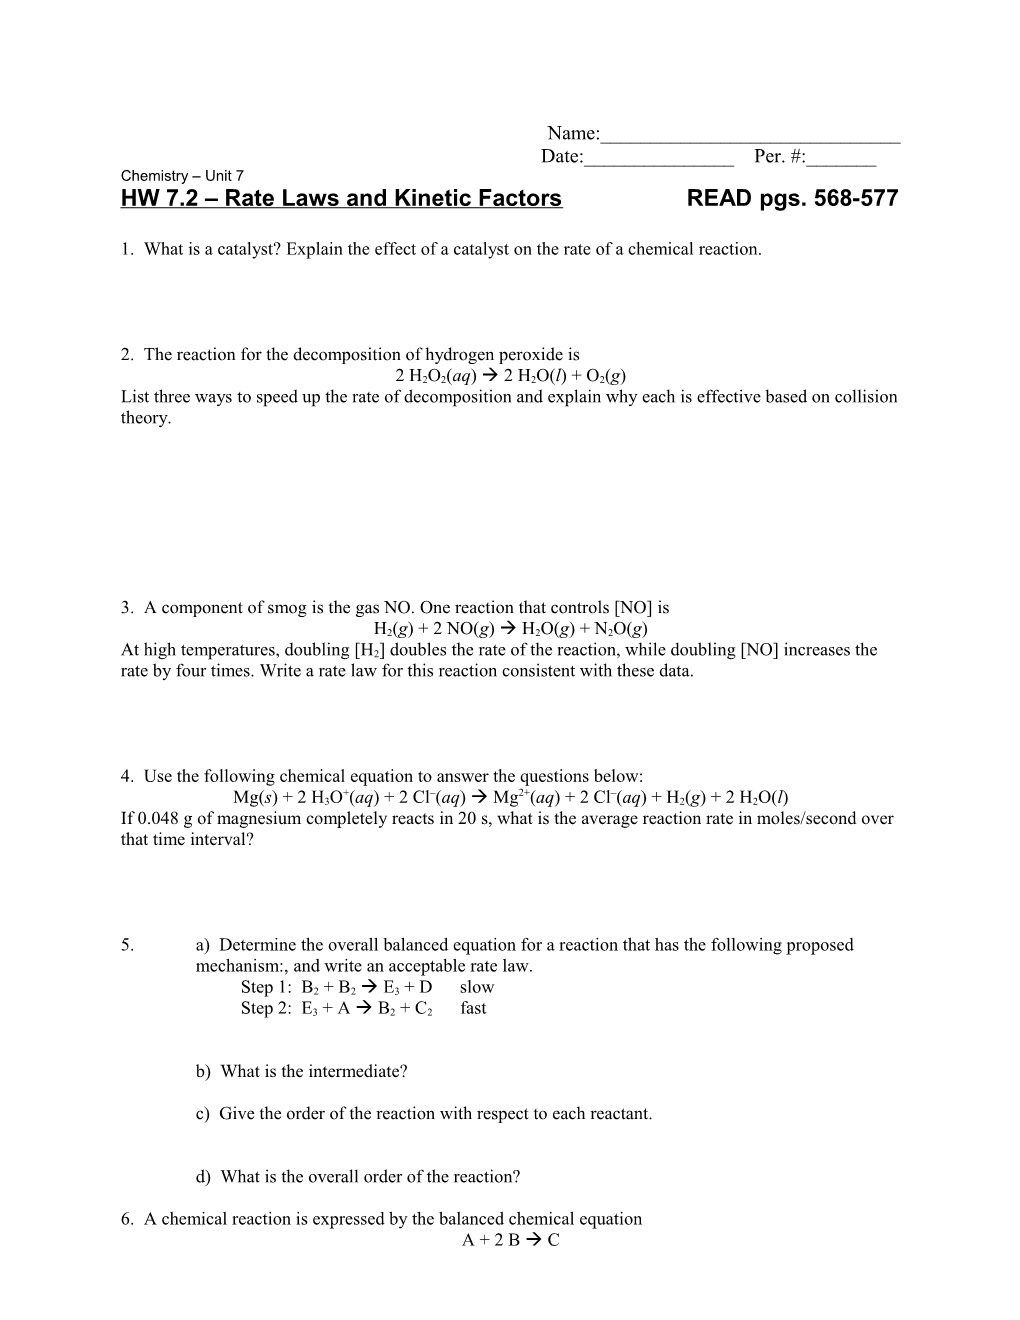 HW 7.2 Rate Laws and Kinetic Factors READ Pgs. 568-577